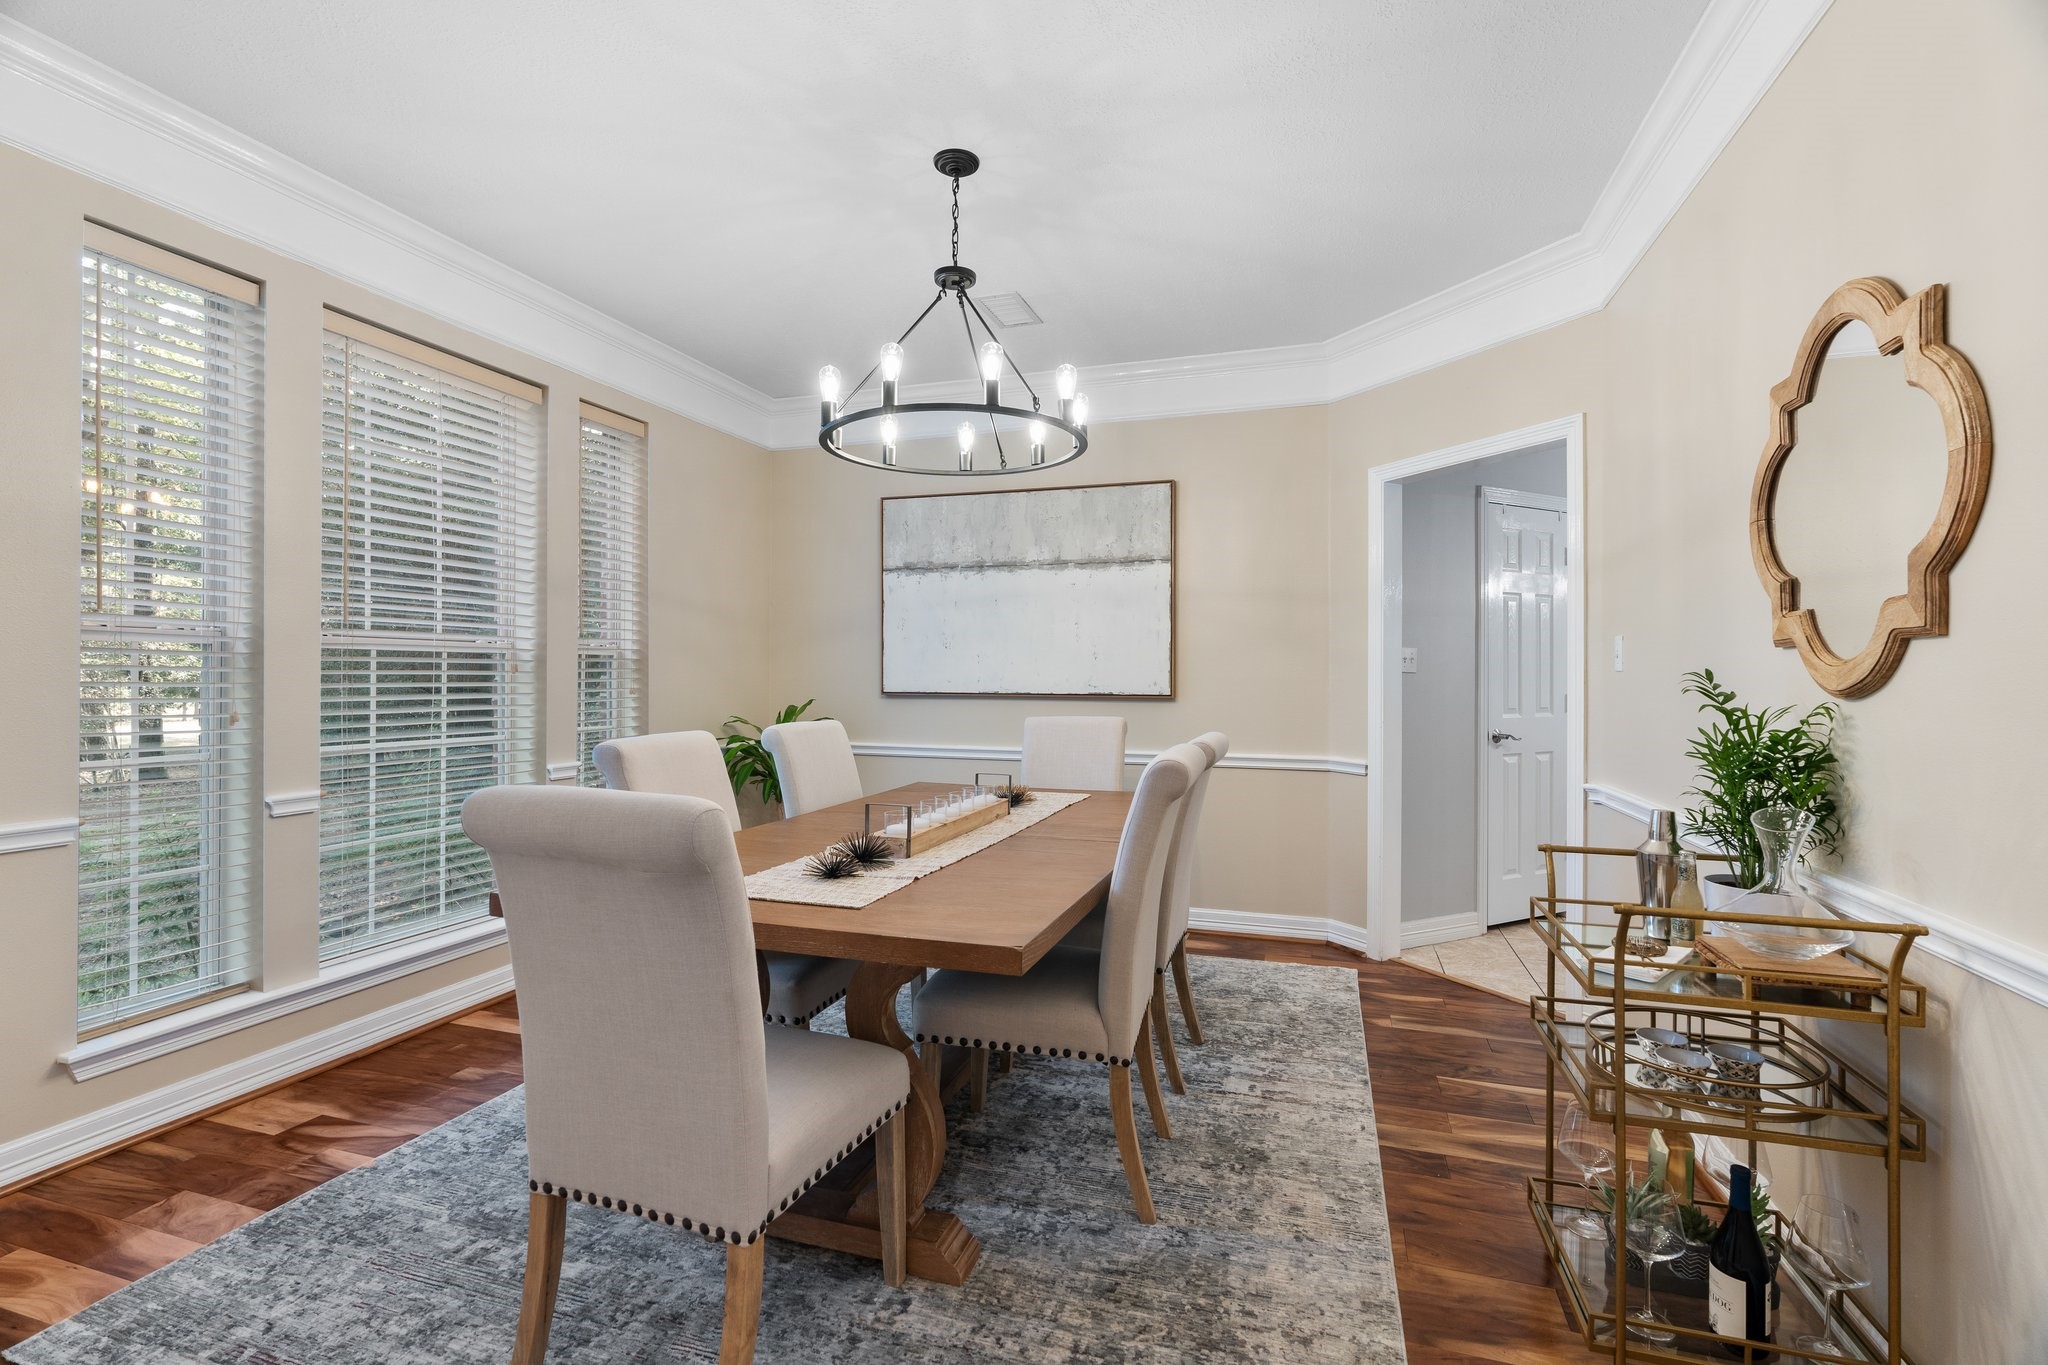 Spacious formal dining room, conveniently just off kitchen, easily sits 8-10